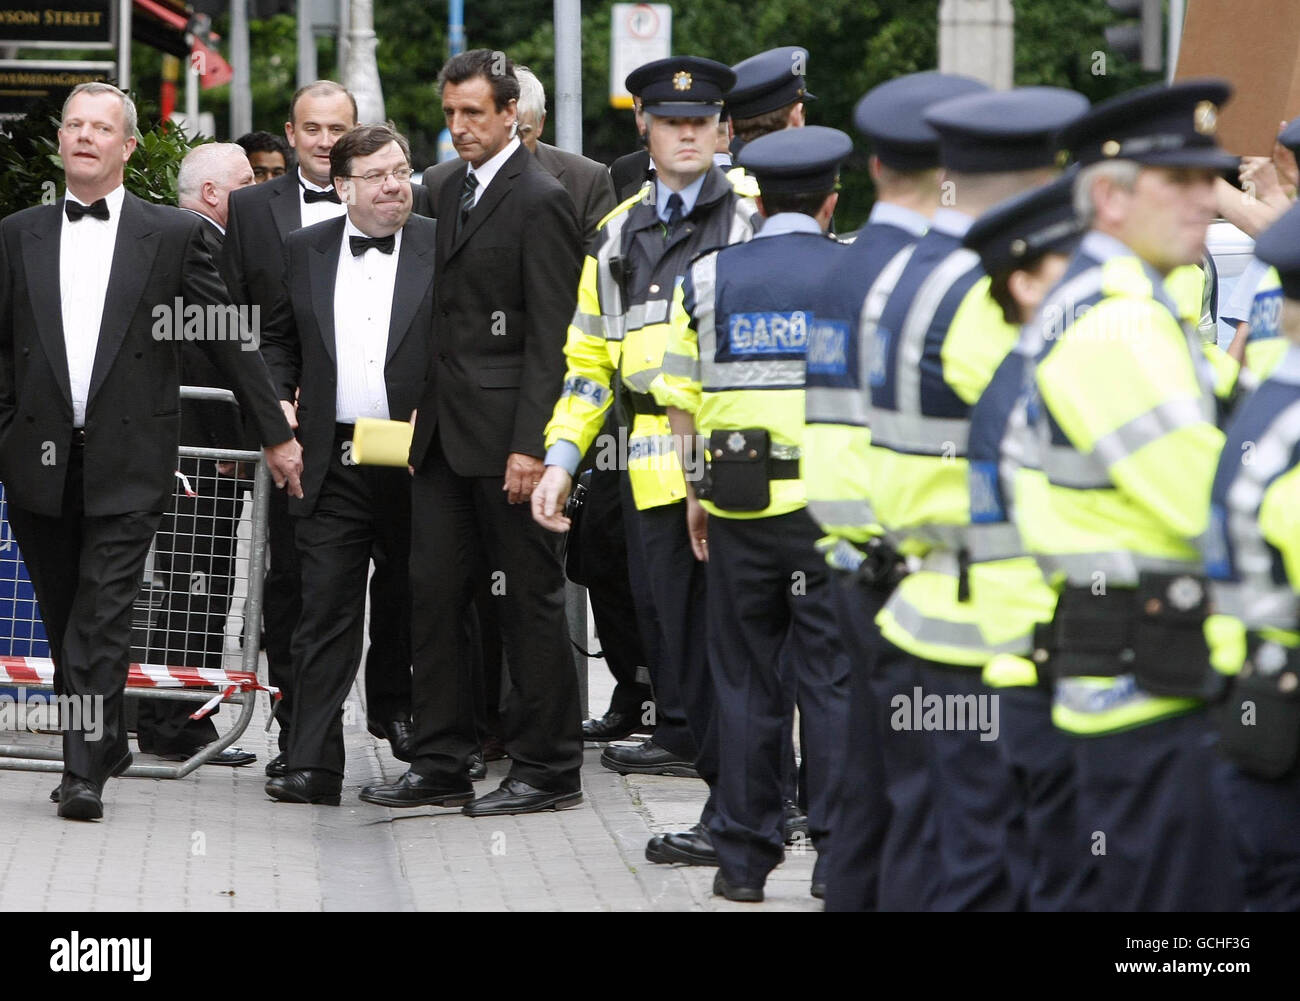 Taoiseach Brian Cowen is jeered by protesters as he arrives for the annual IBEC (Irish Business and Employers Confederation) dinner amid heavy security at Mansion House, Dublin. Stock Photo